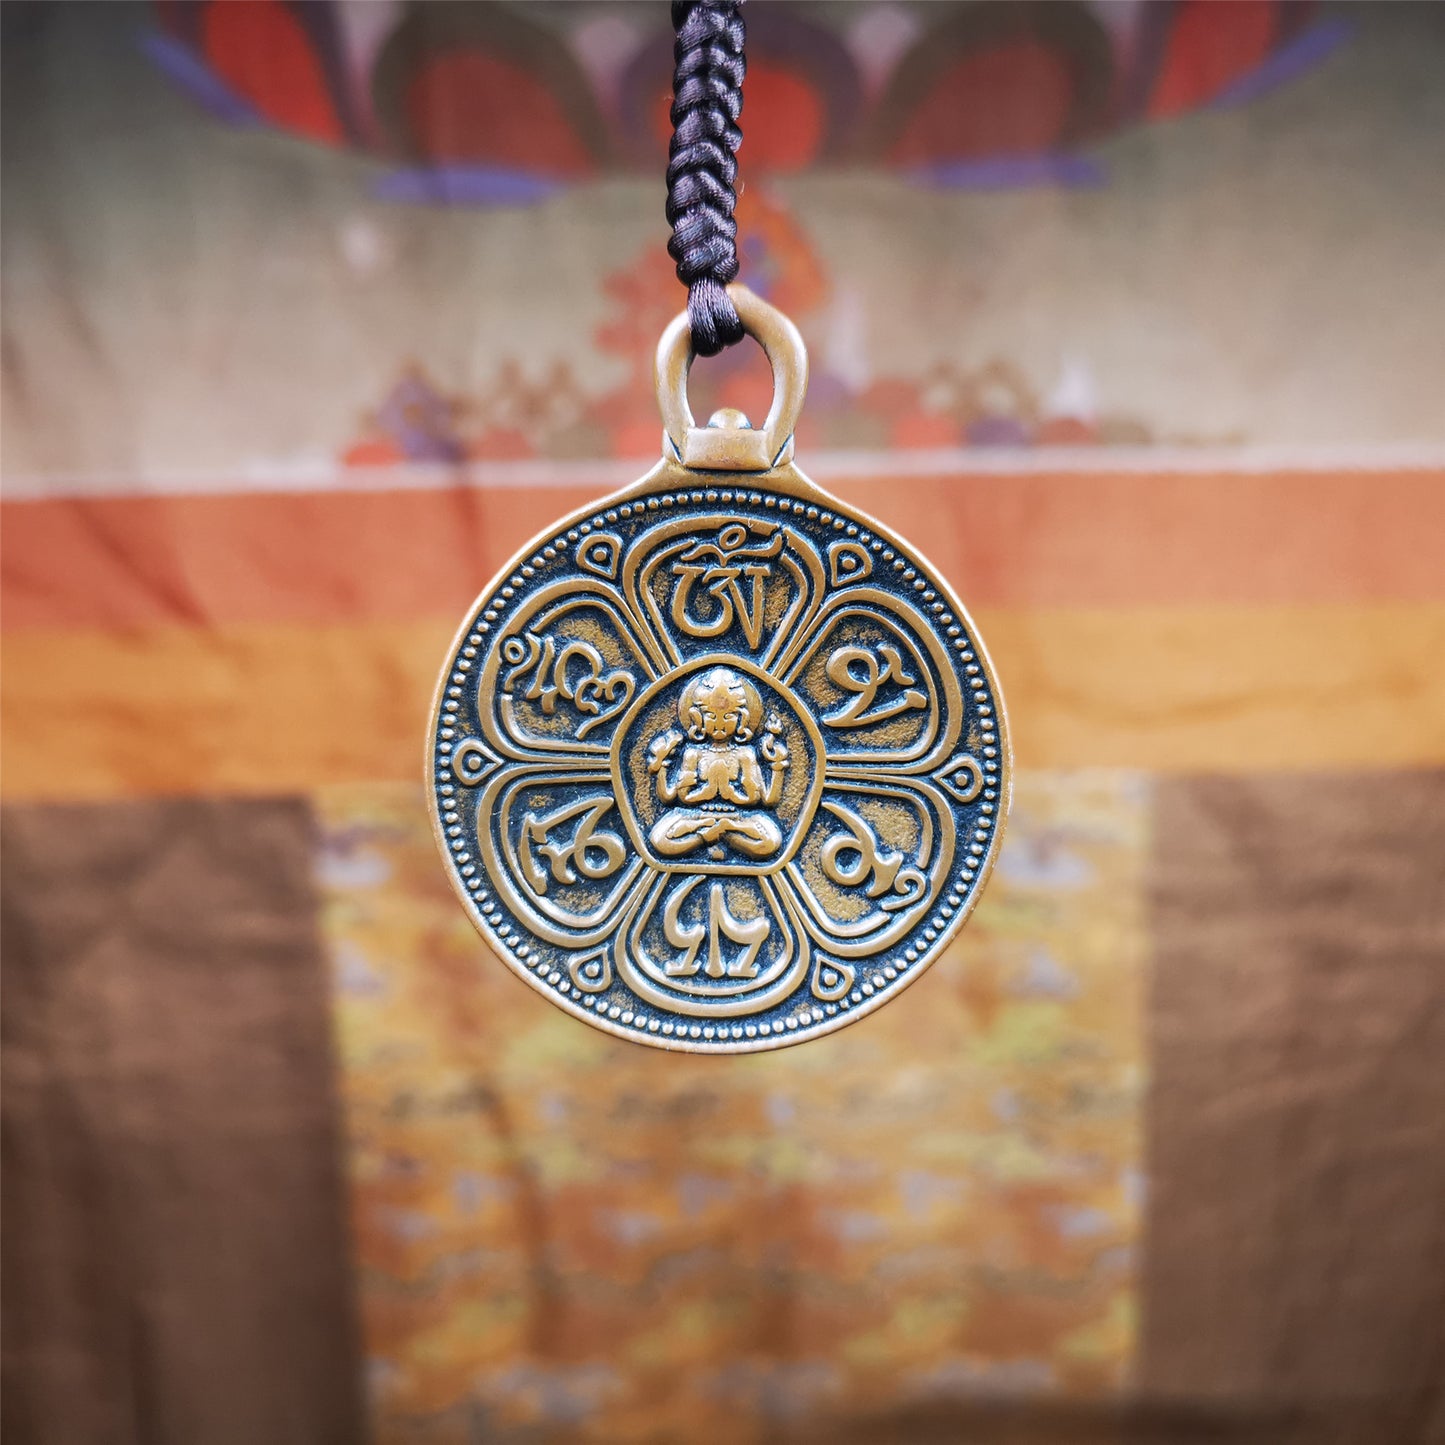 This OM badge amulet was collected from Jiegu Monastery Tibet.It is made of copper,diameter is 1.65 inches,Chenrezig is on the center, carved with Tibetan Letter ,Om Mani Padme Hum mantra,the letter on the back is Mind